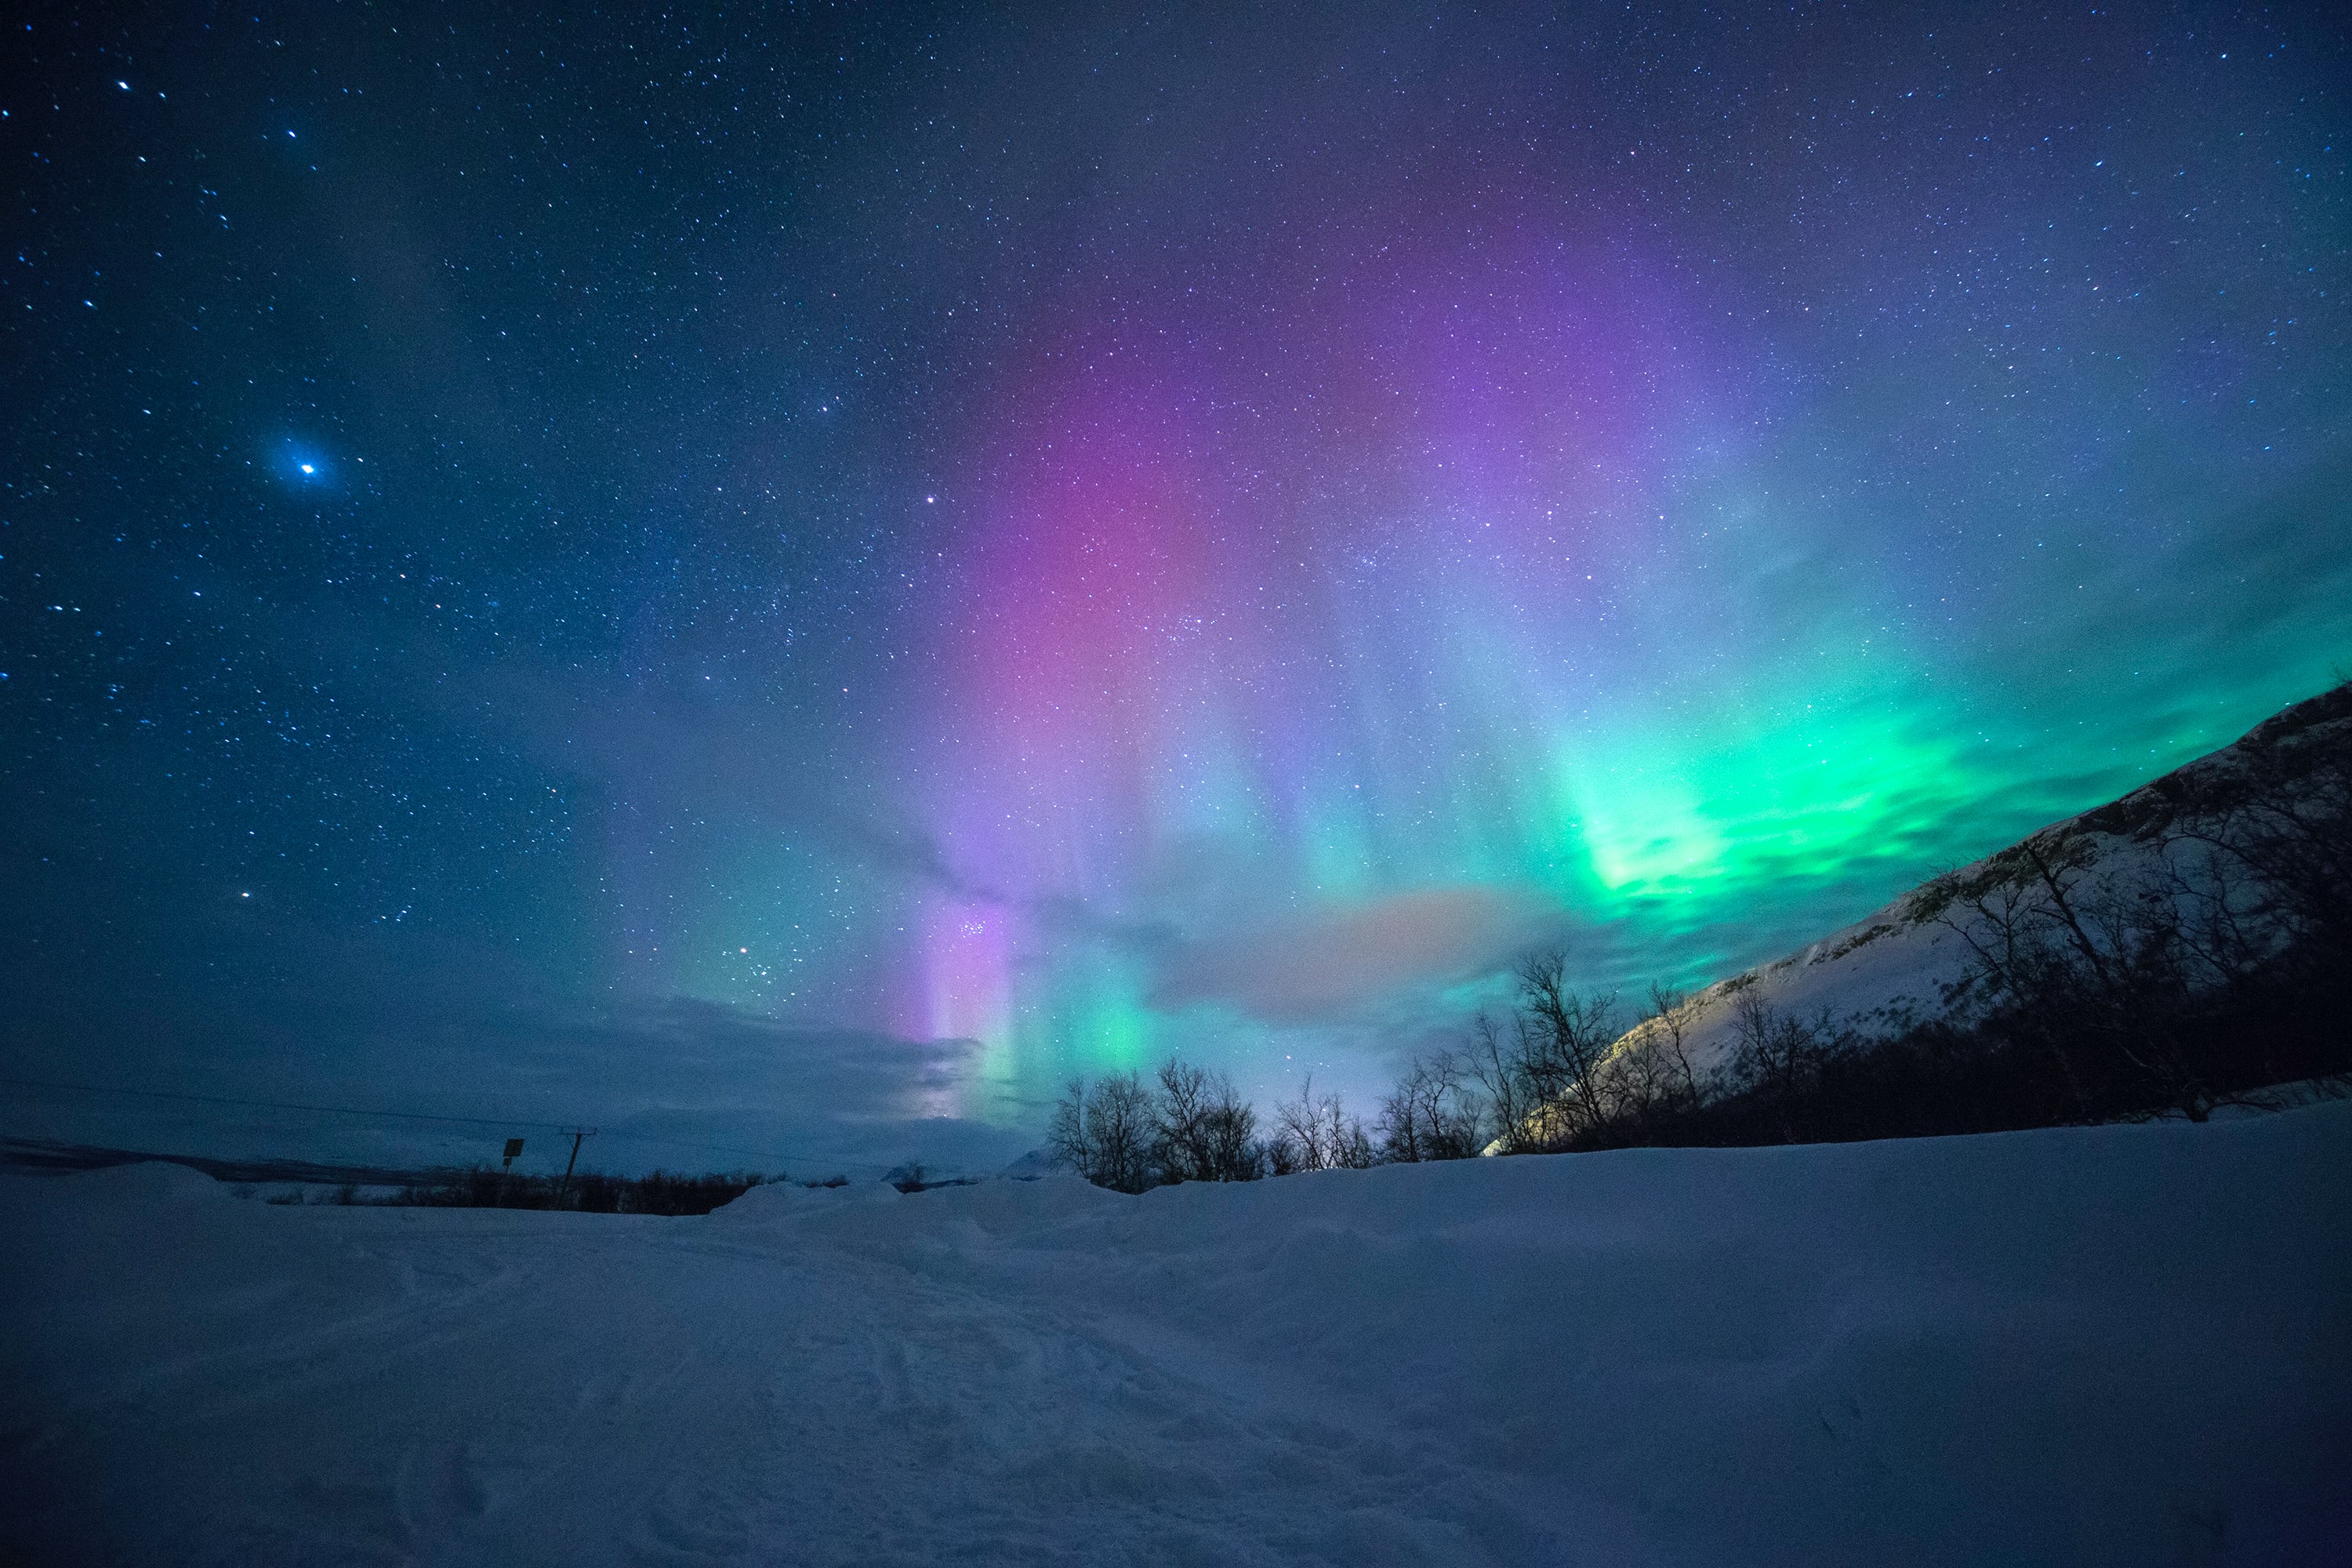 4 Days In The Quest For Northern Lights Sweden (Kiruna 3N)